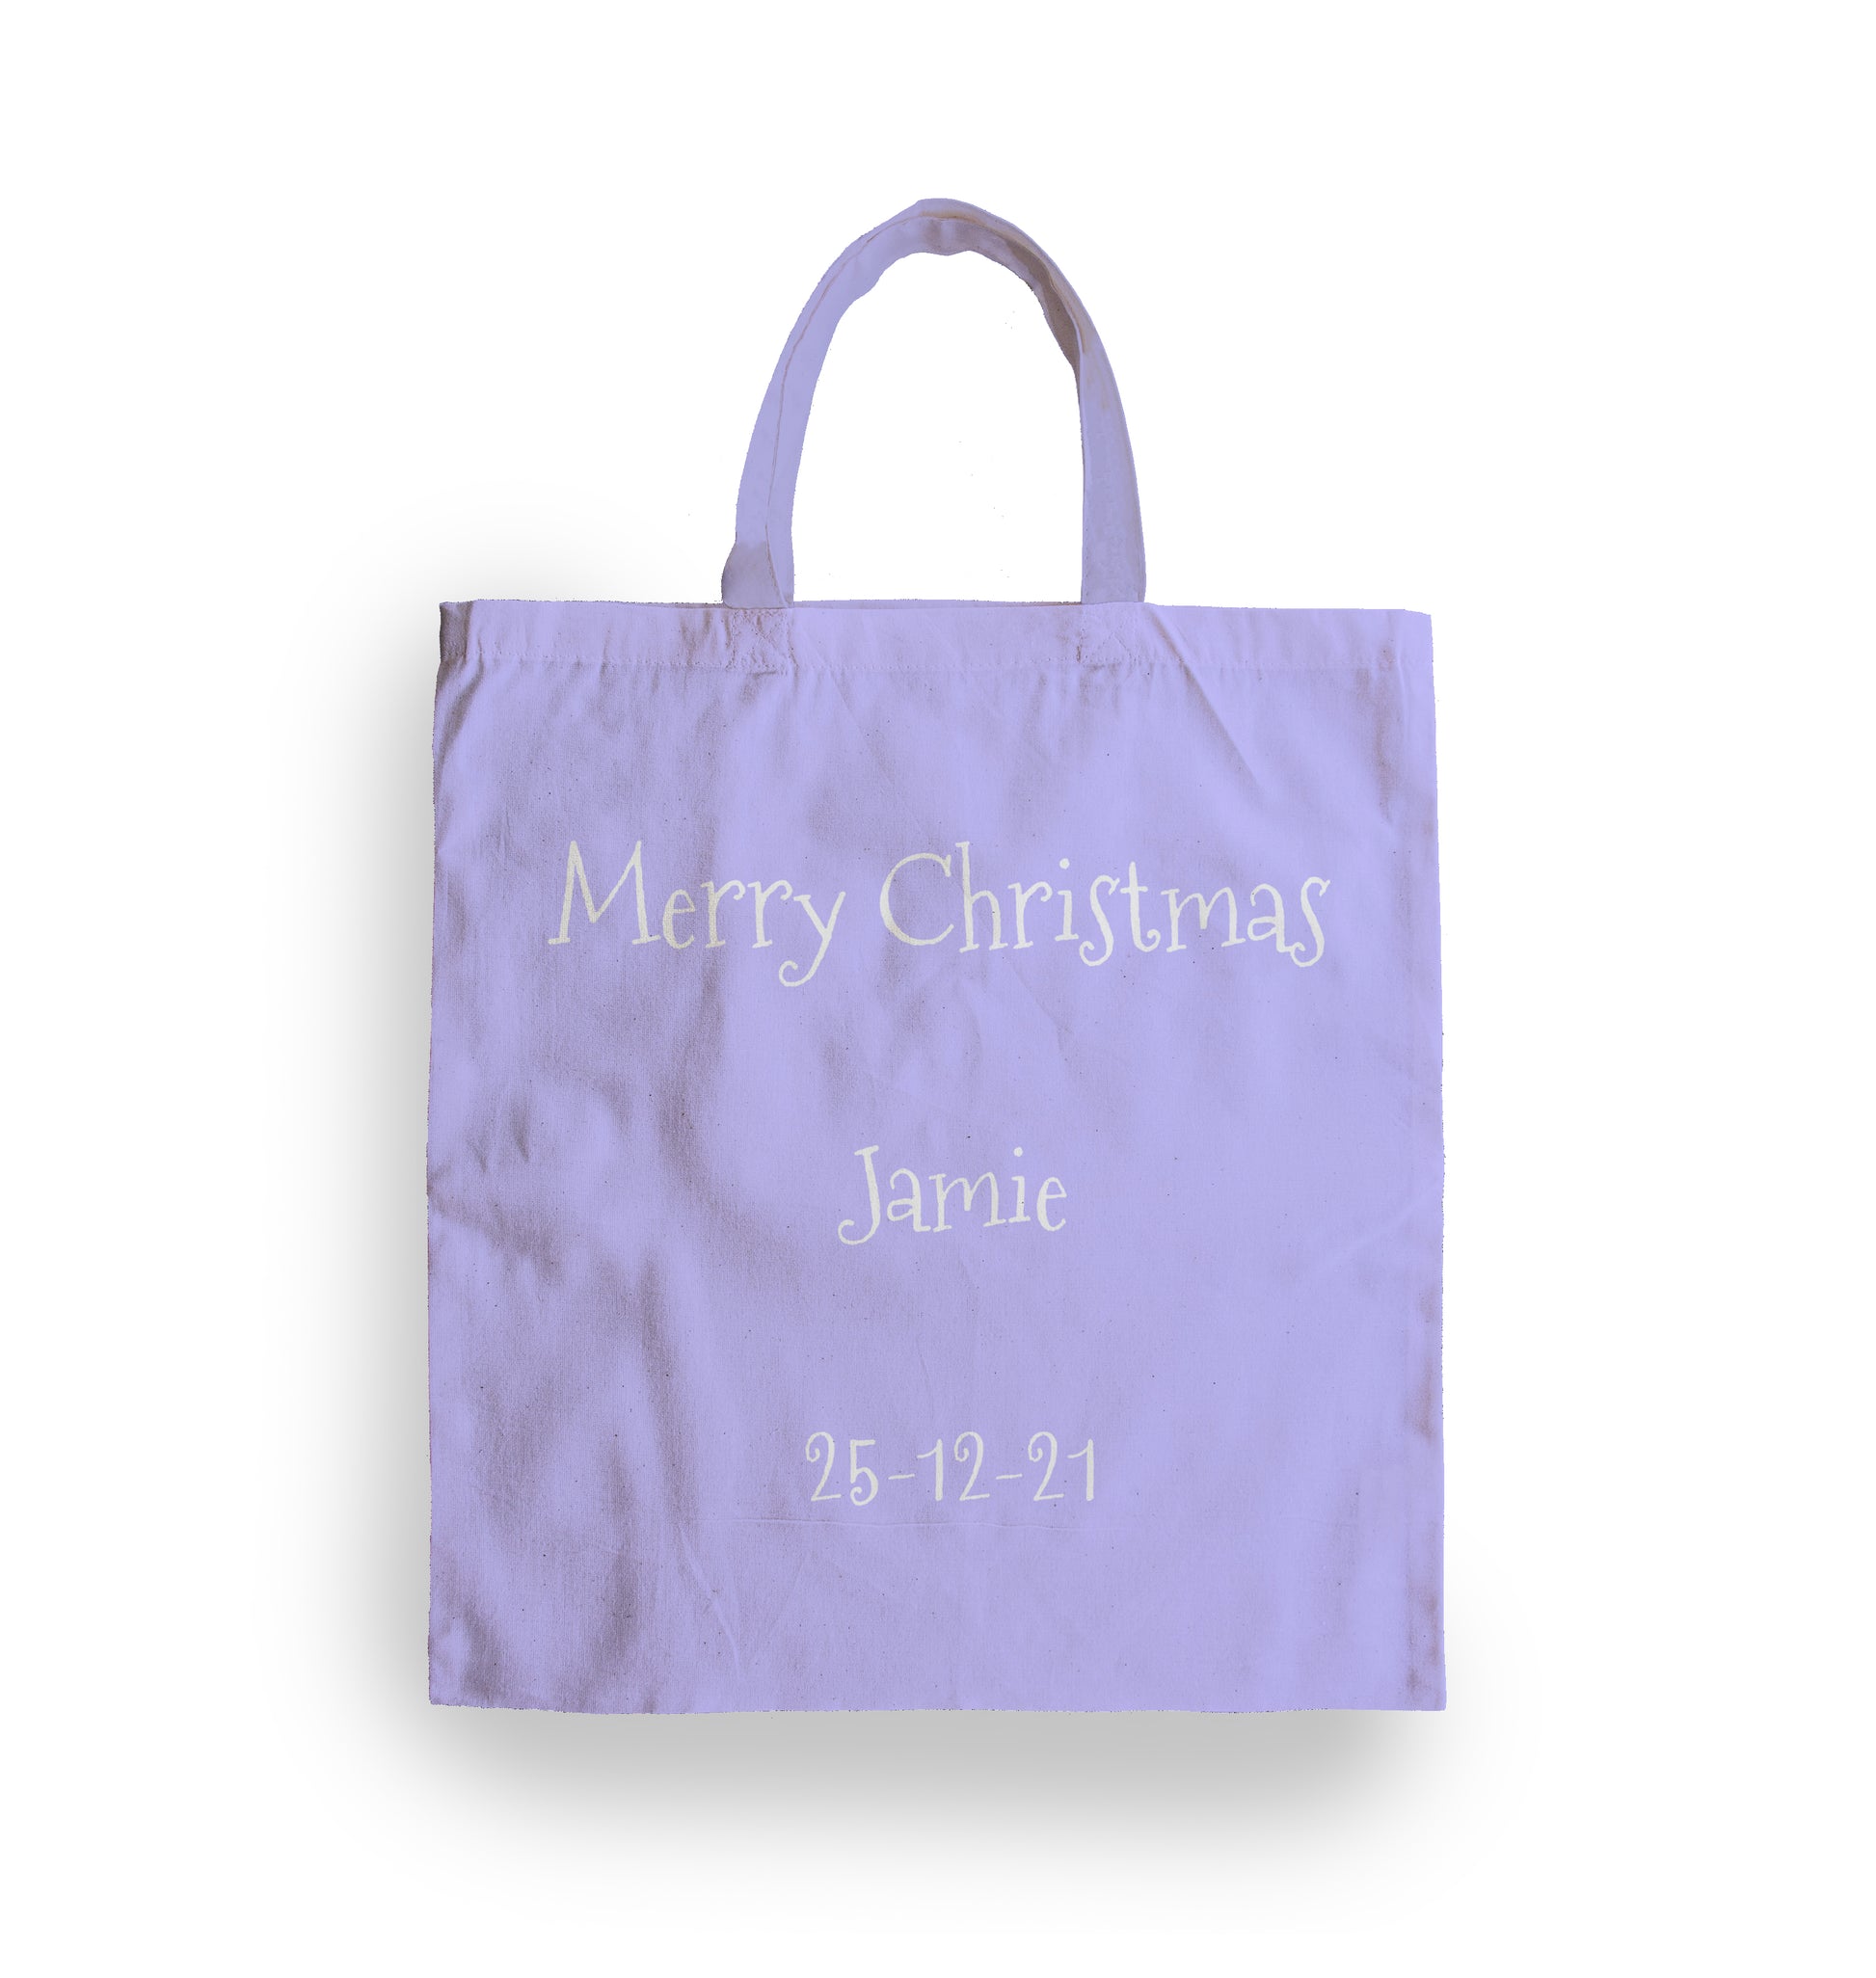 Personalised Tote Bag Christmas Emoji. Lilac Background. Added Text is "Merry Christmas", Name and Date.